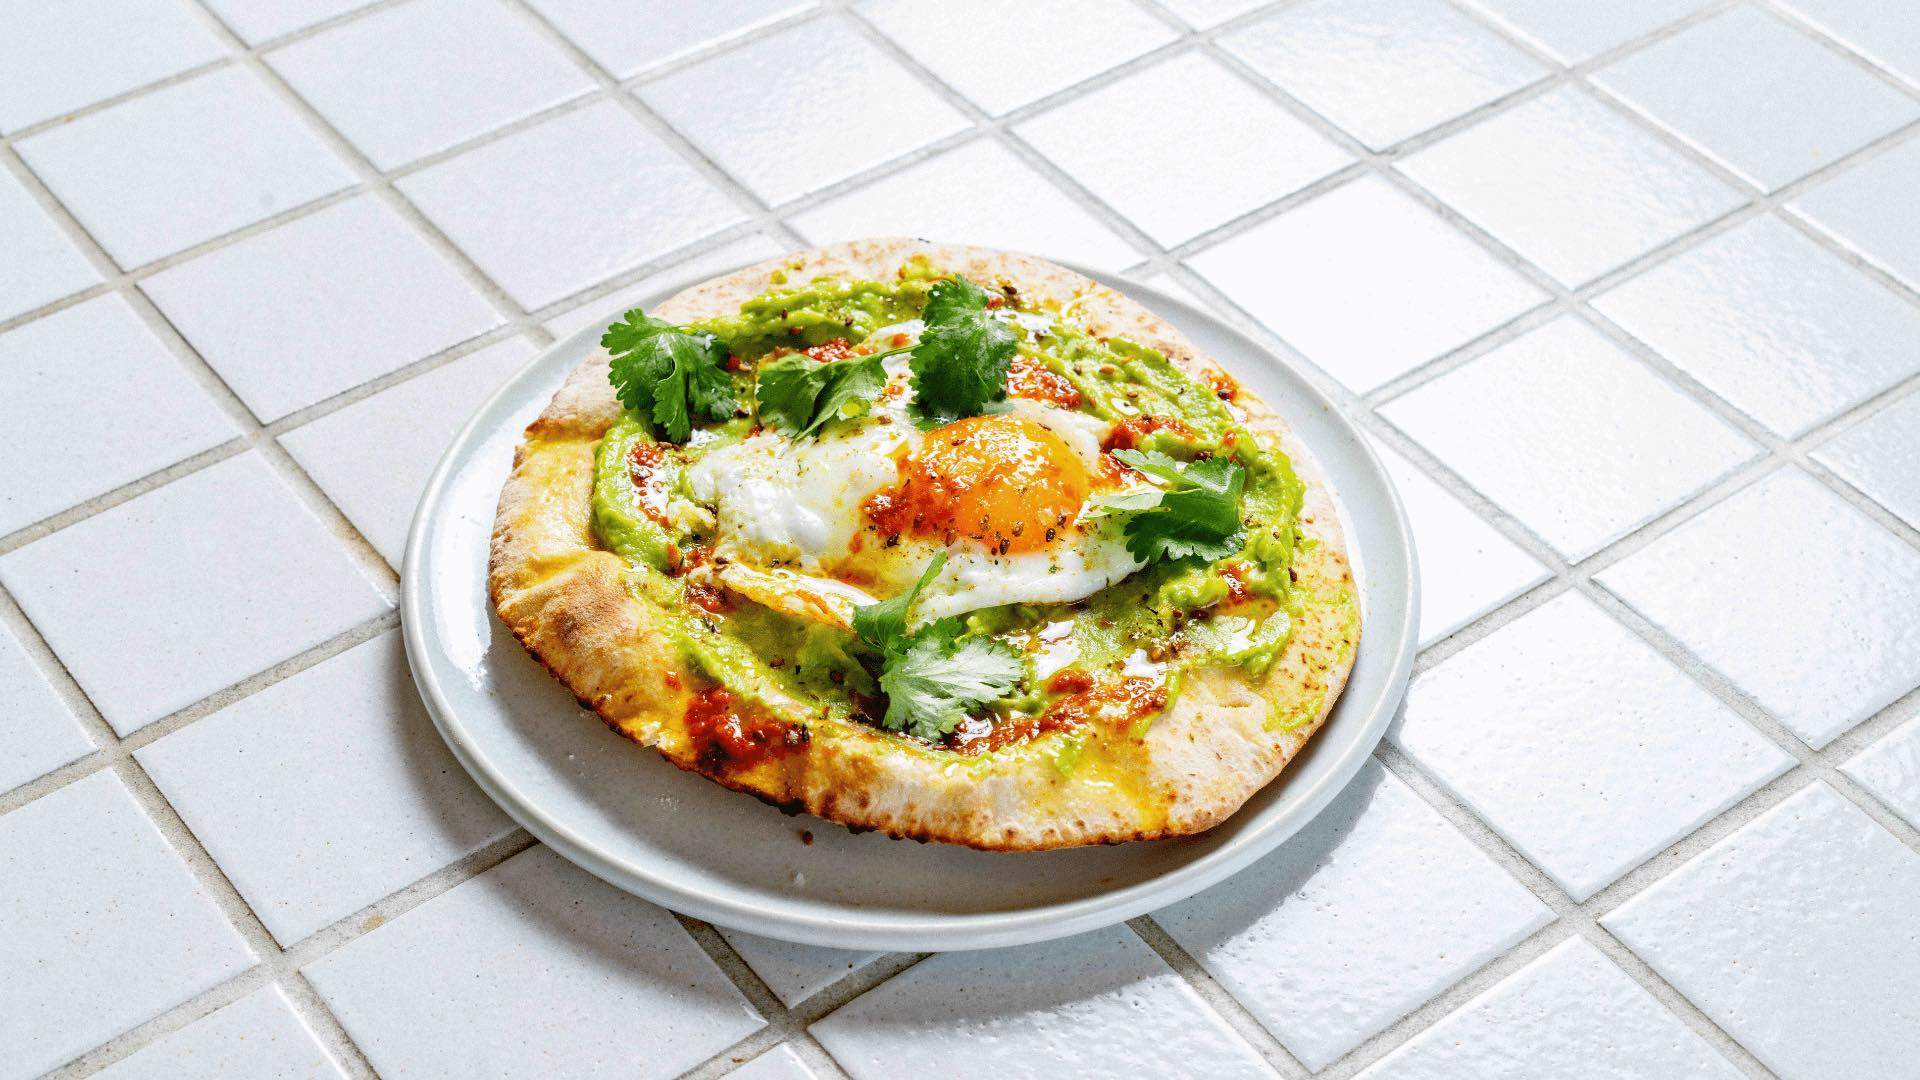 A photo of flatbread topped with avocado and a fried egg.